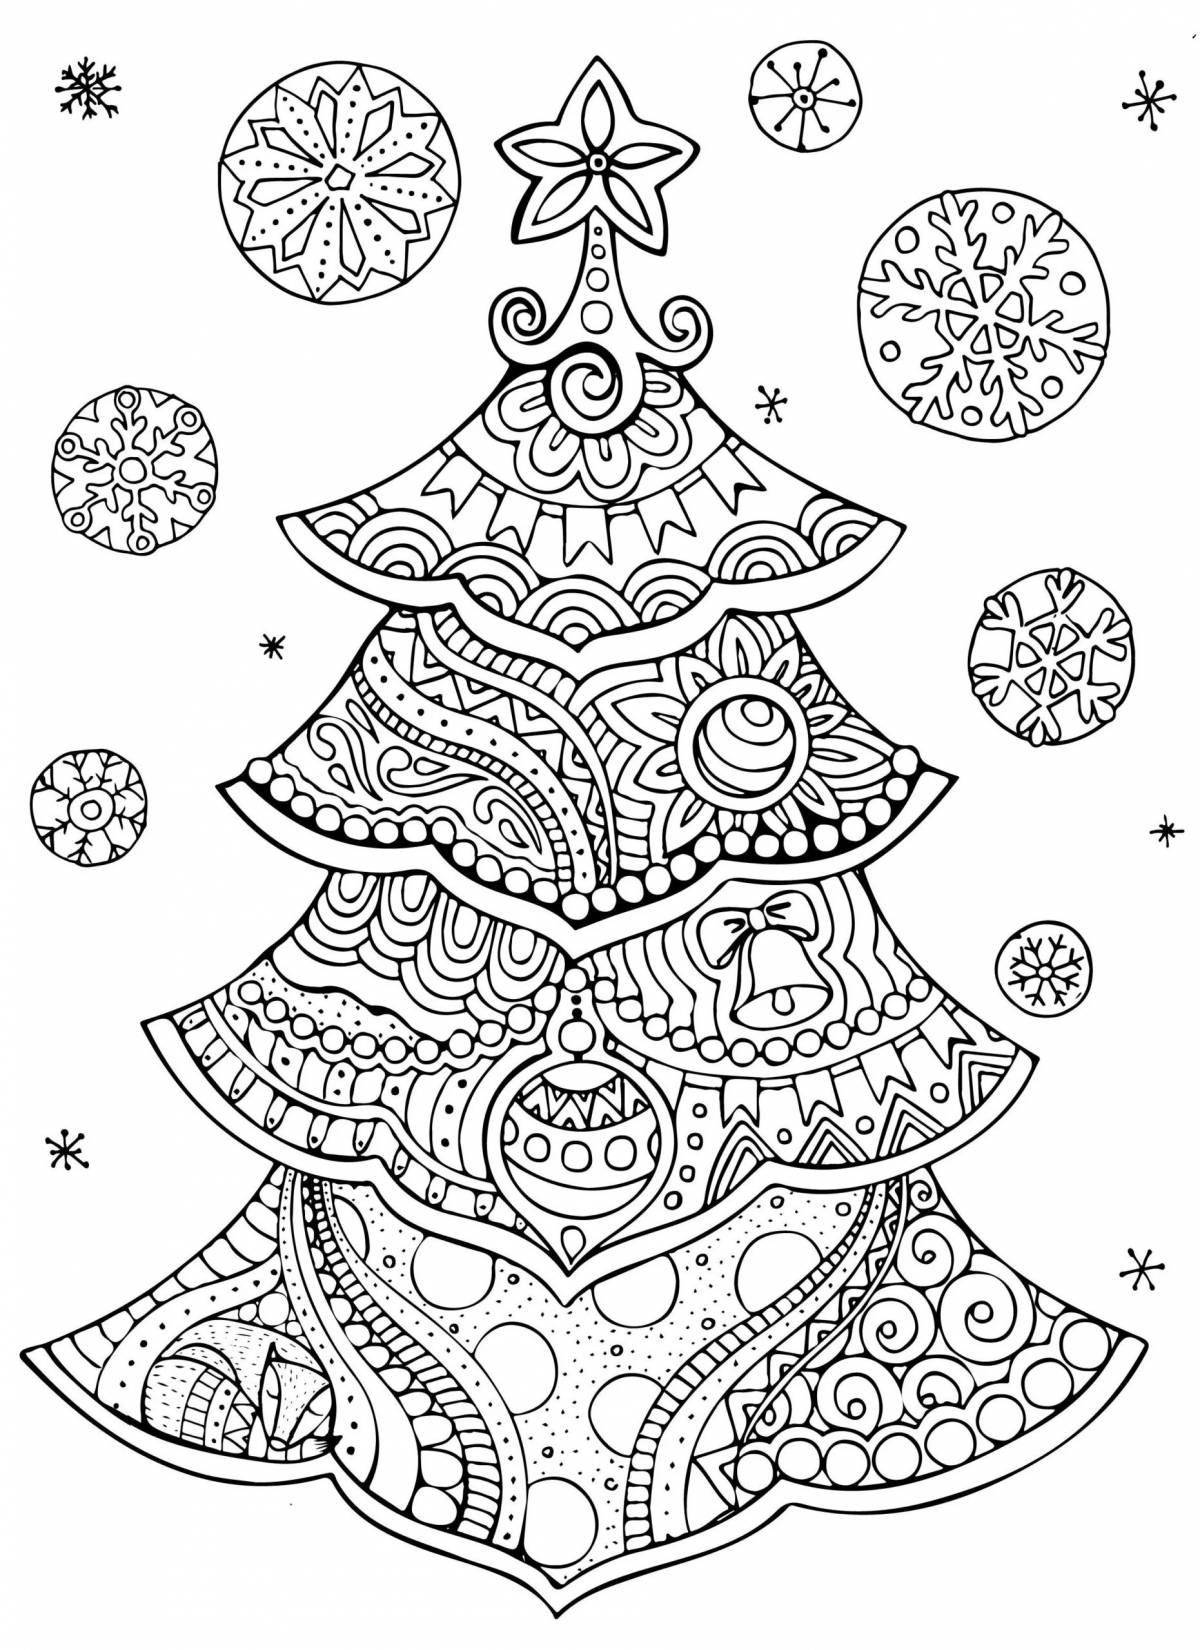 Christmas tree coloring book for children